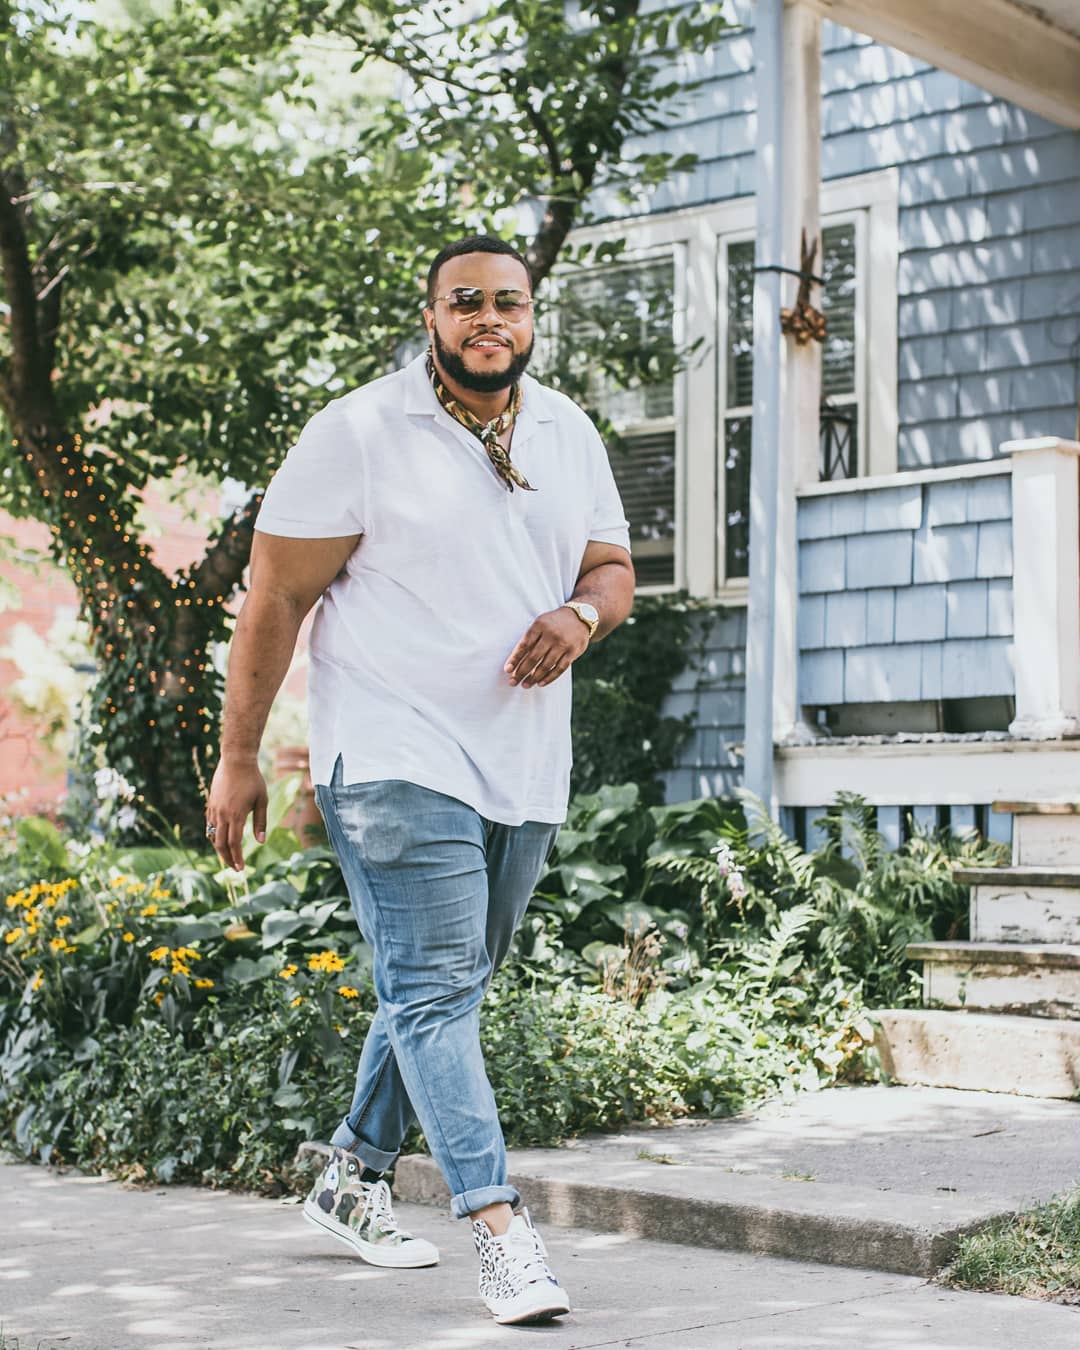 Men Plus-sized Fashion Tips: 3 Key Things You Should Know